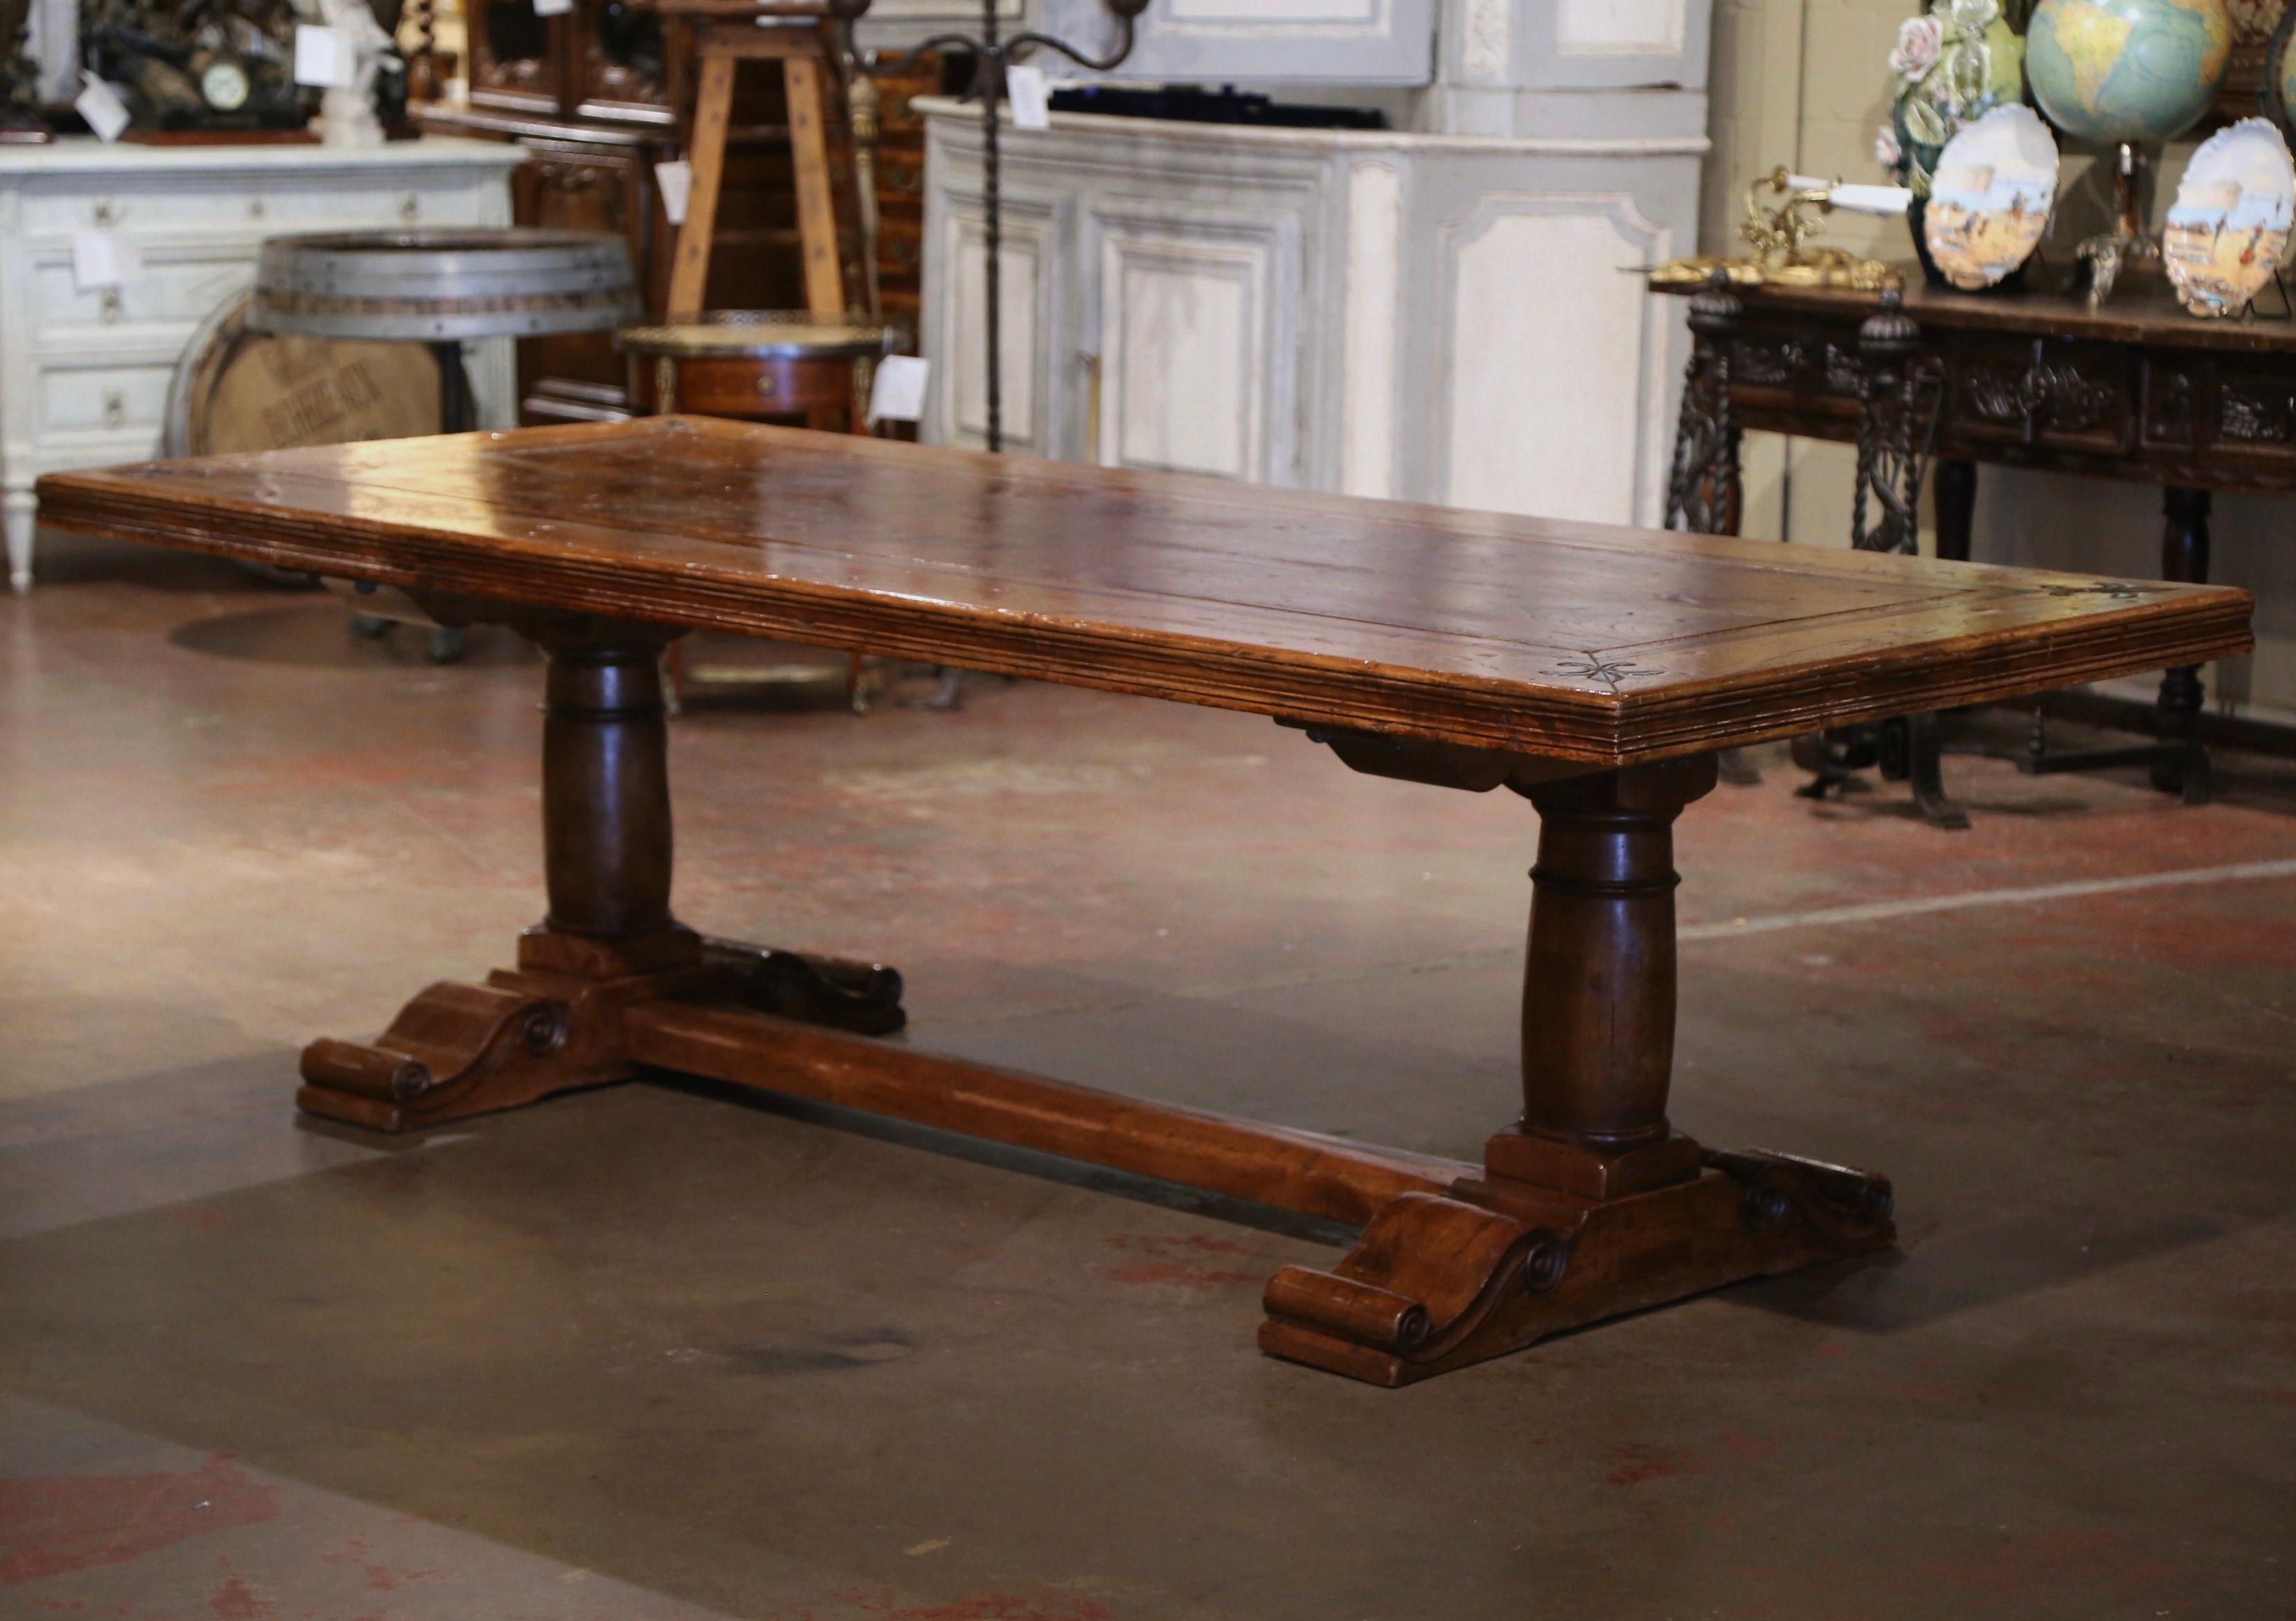 This elegant dining table was crafted in the Pyrenees of France using antique timbers, and following an 18th century design. Over 8 feet long, the large table sits on a trestle base, supported by hand carved turned baluster form support legs ending